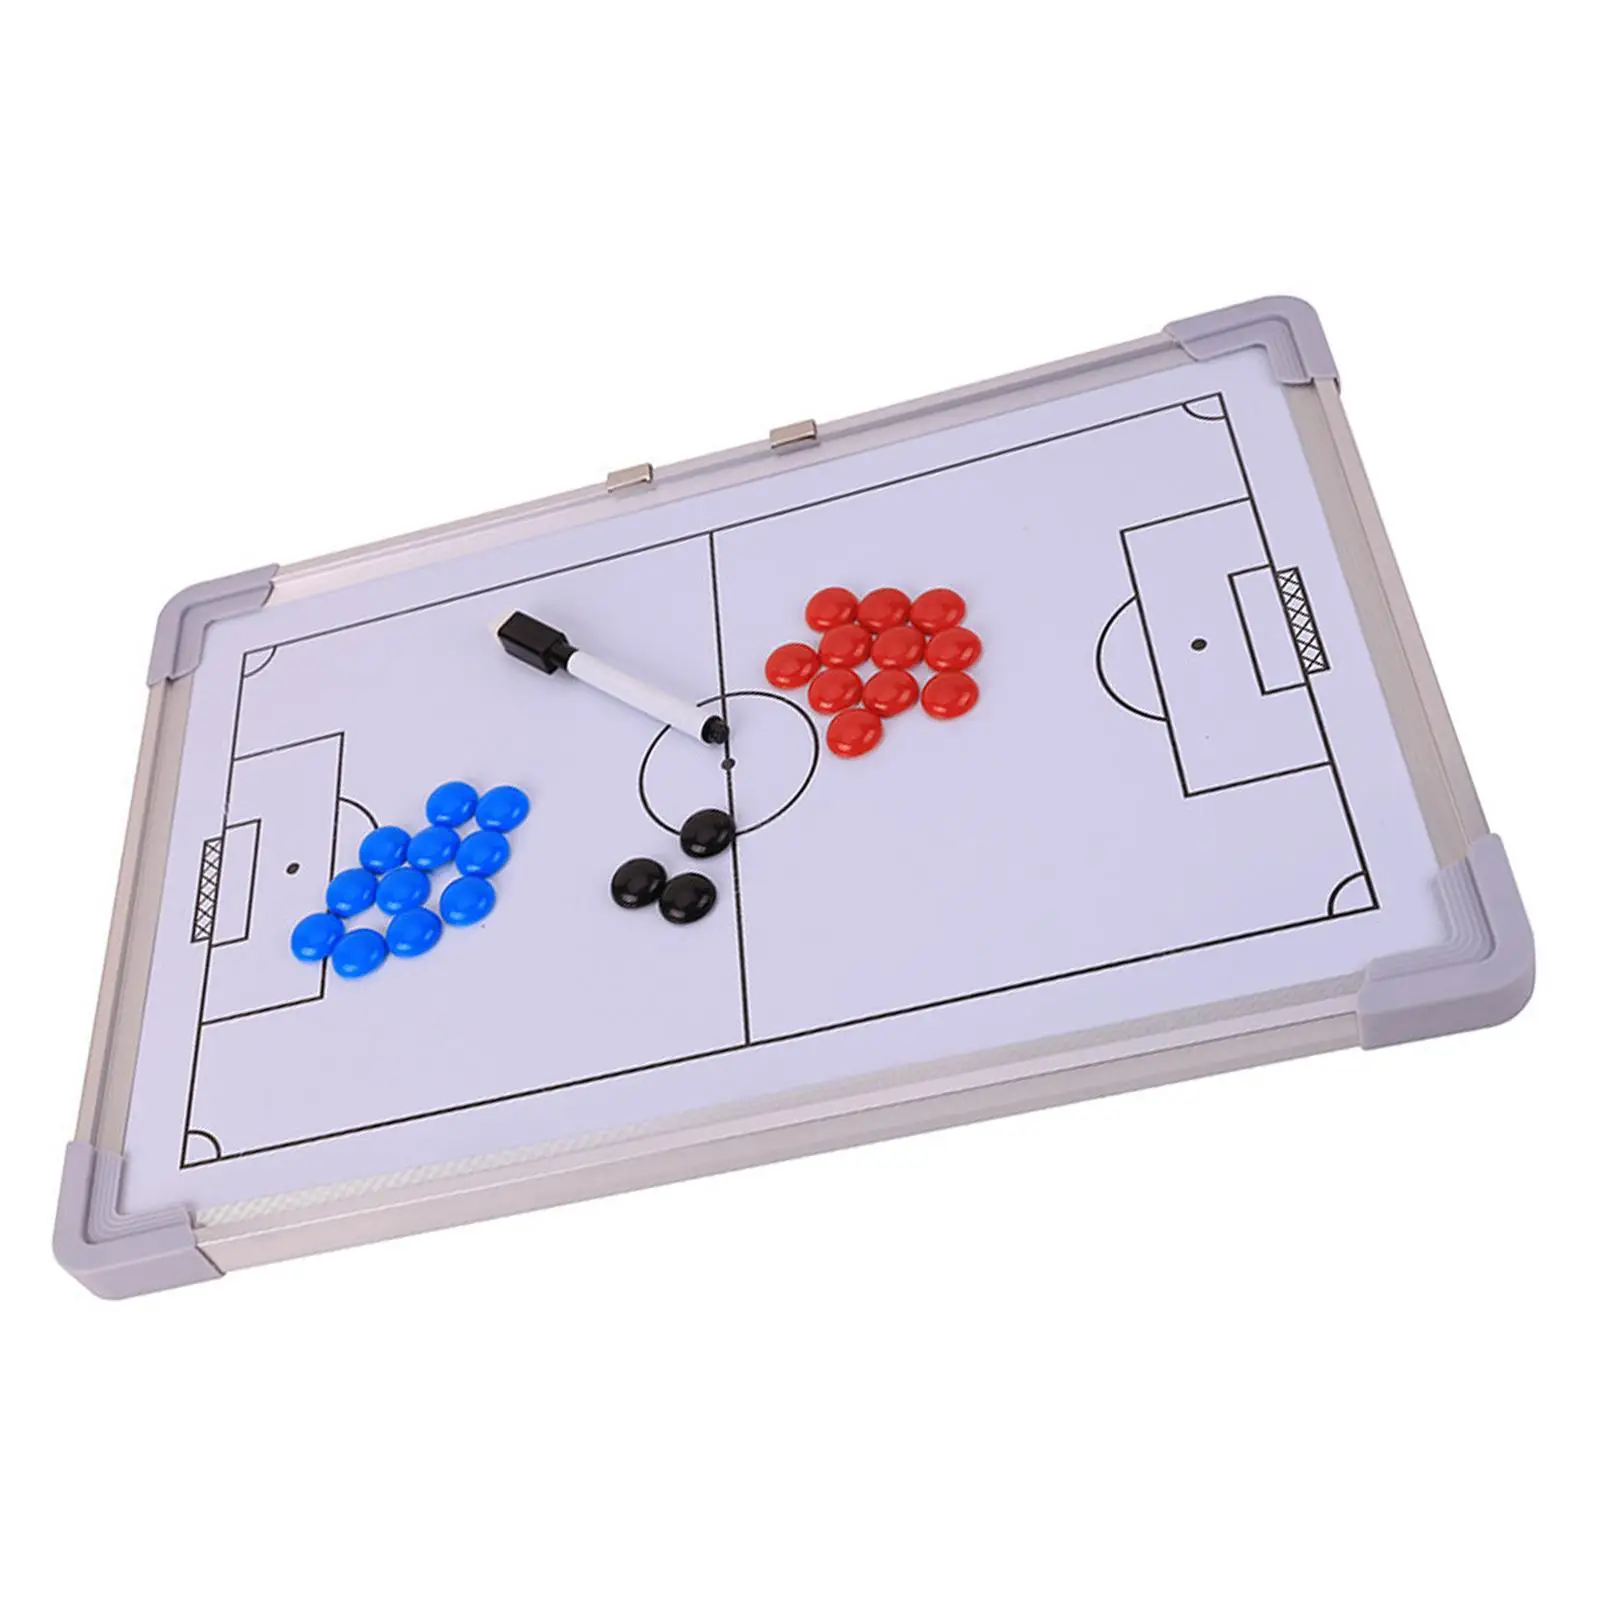 Soccer Coaching Board with Marker Pen Easy to Clean Useful Equipment Magnets